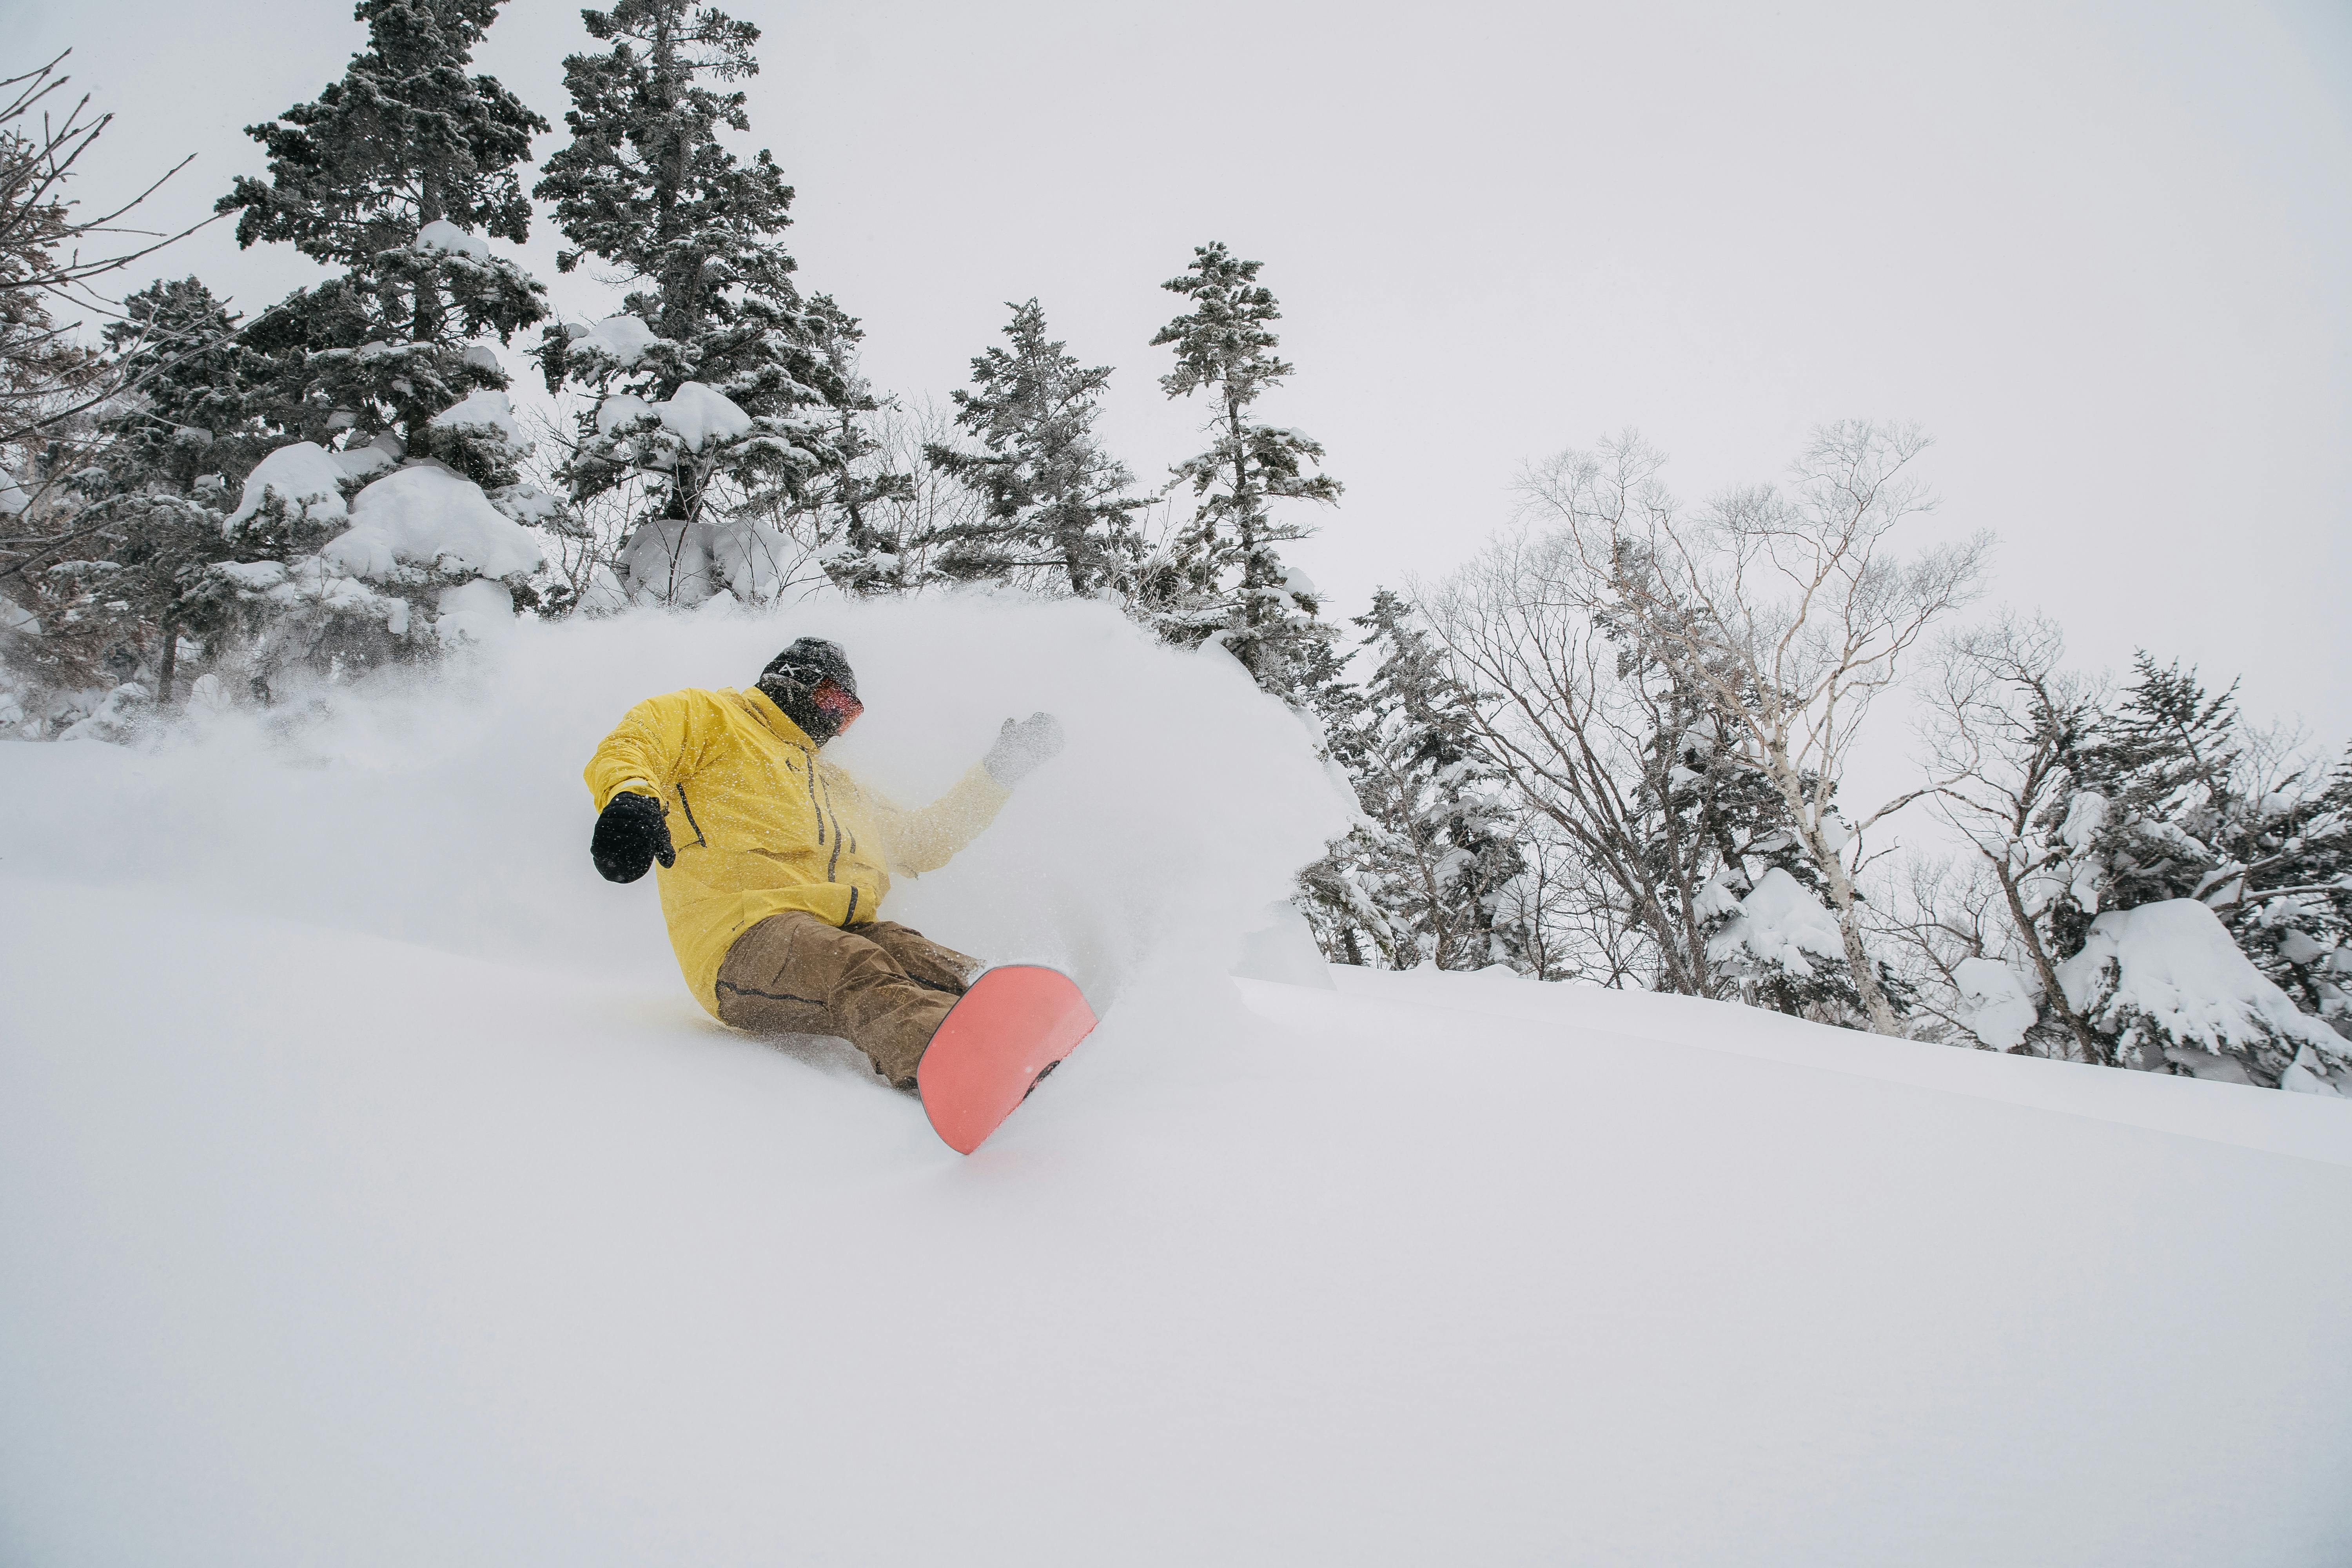 Downing carves on his Burton board, sending a spray of powder off behind him on a gray day.